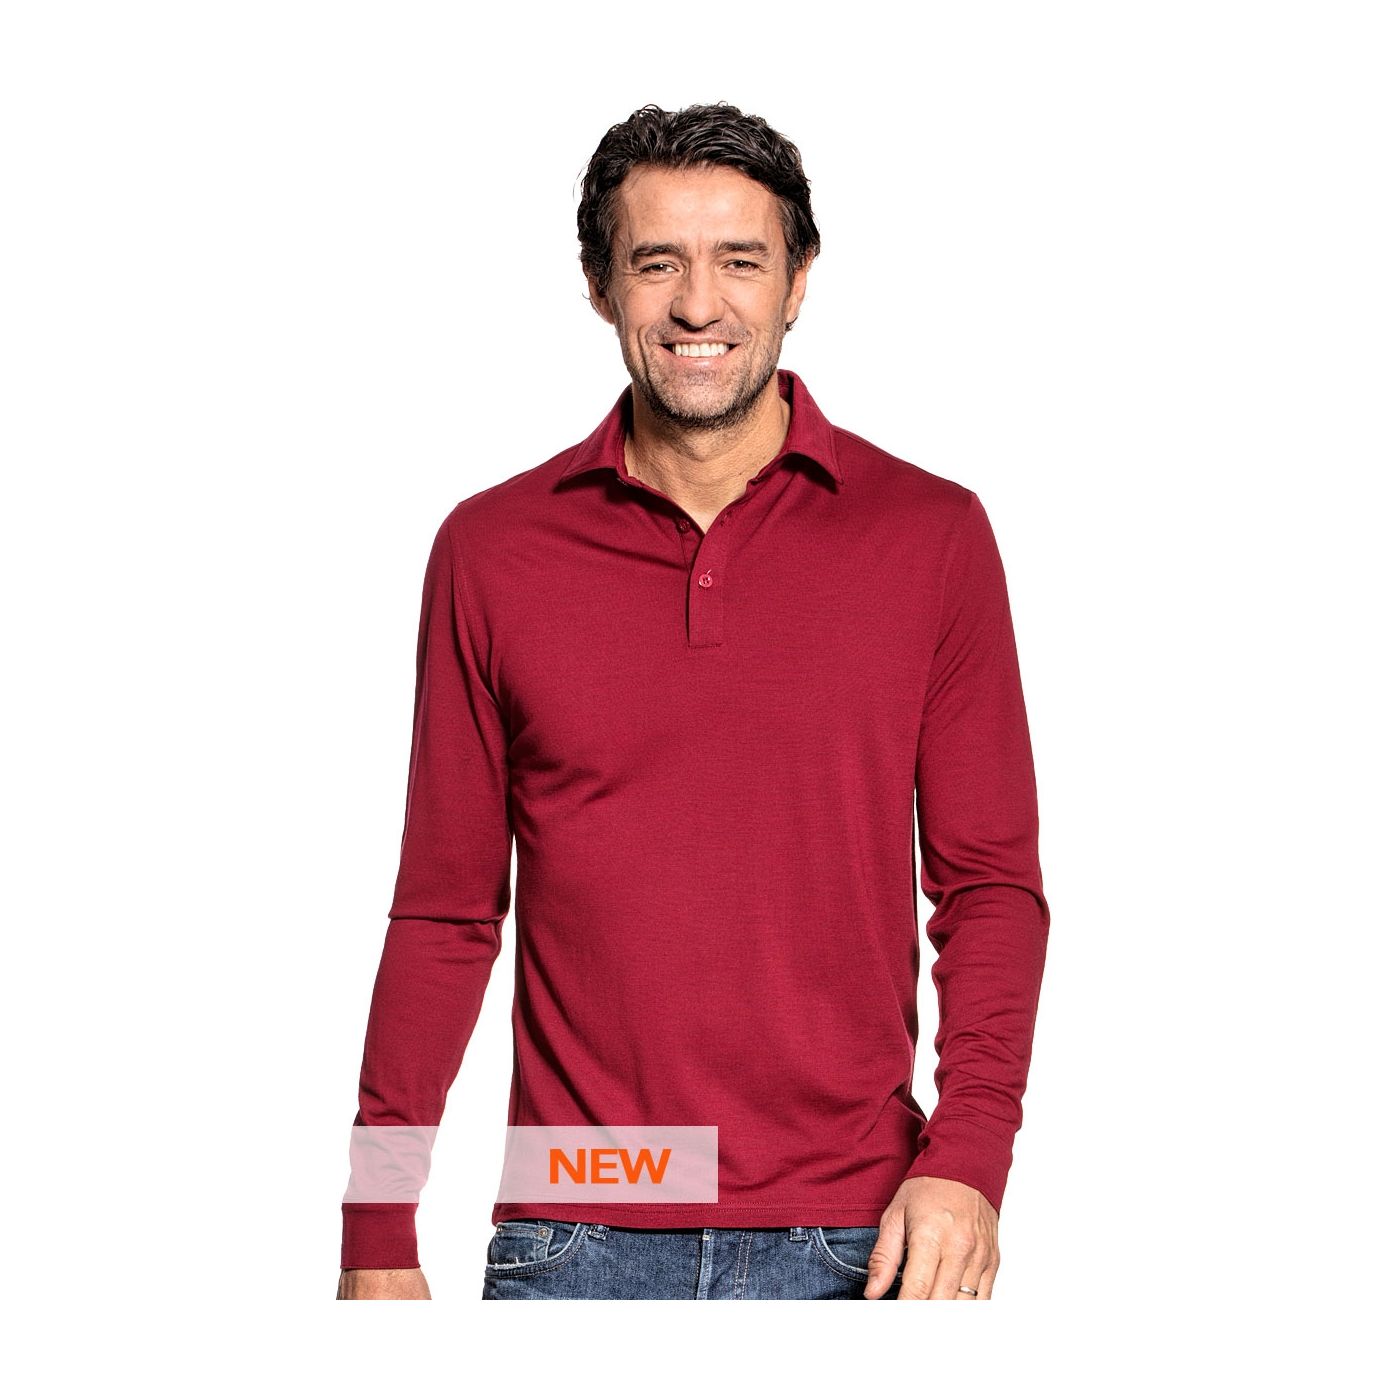 Polo shirt long sleeve for men made of Merino wool in Red